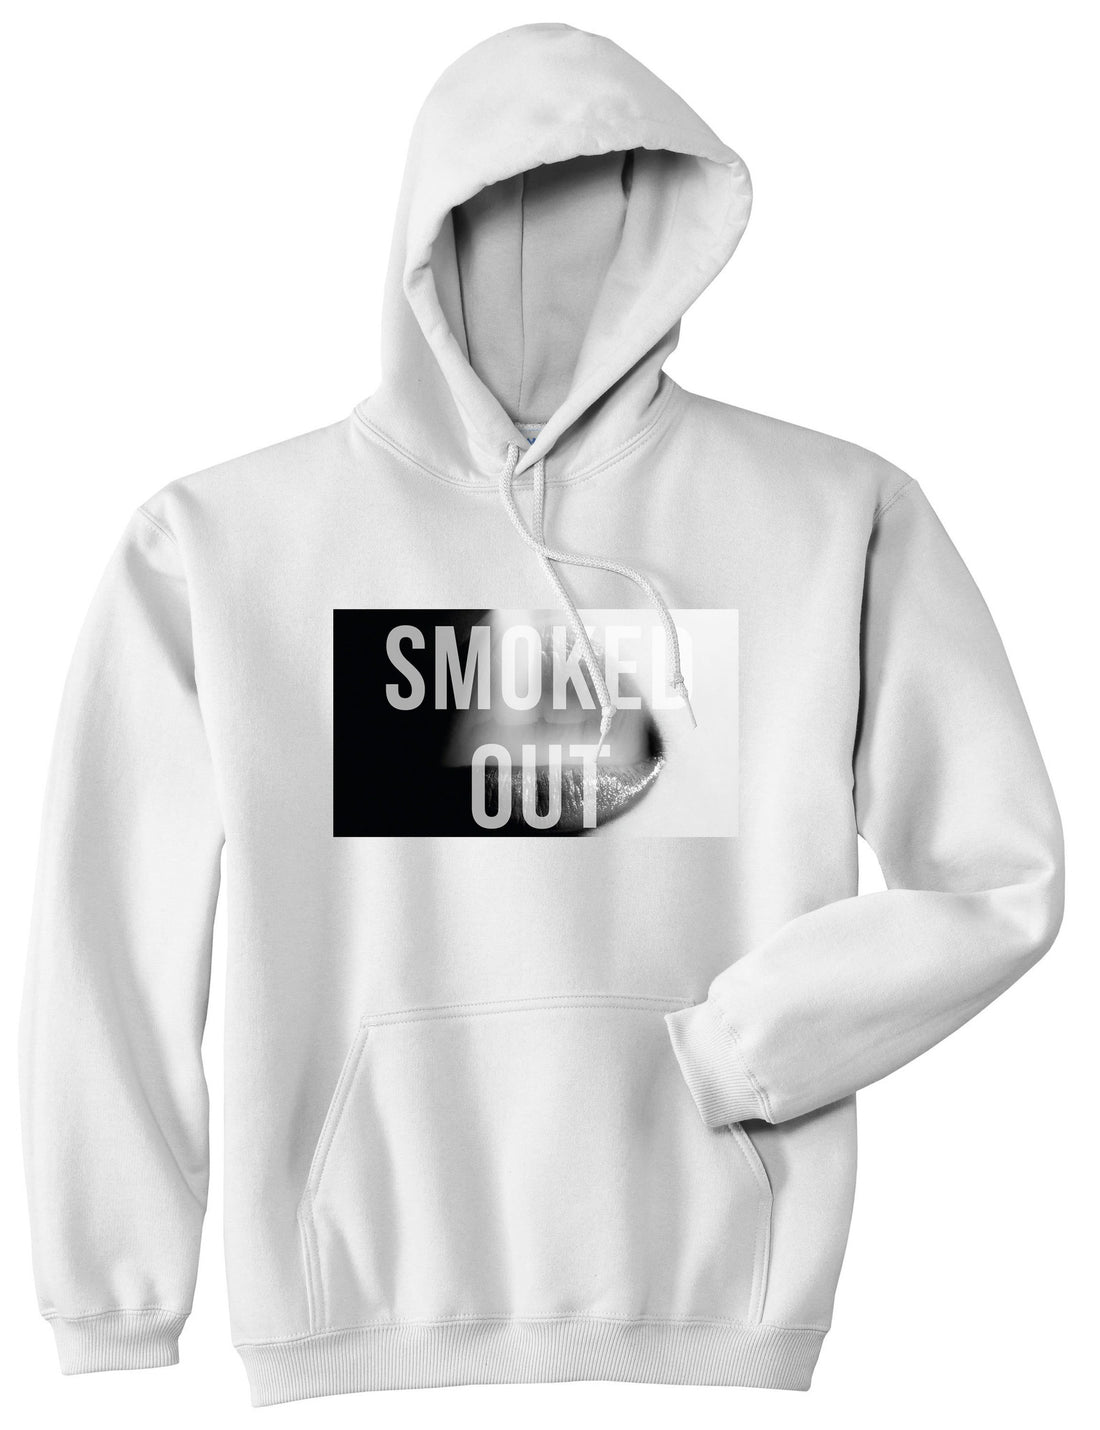 Smoked Out Weed Marijuana Girls Pot New York Boys Kids Pullover Hoodie Hoody in White by Kings Of NY